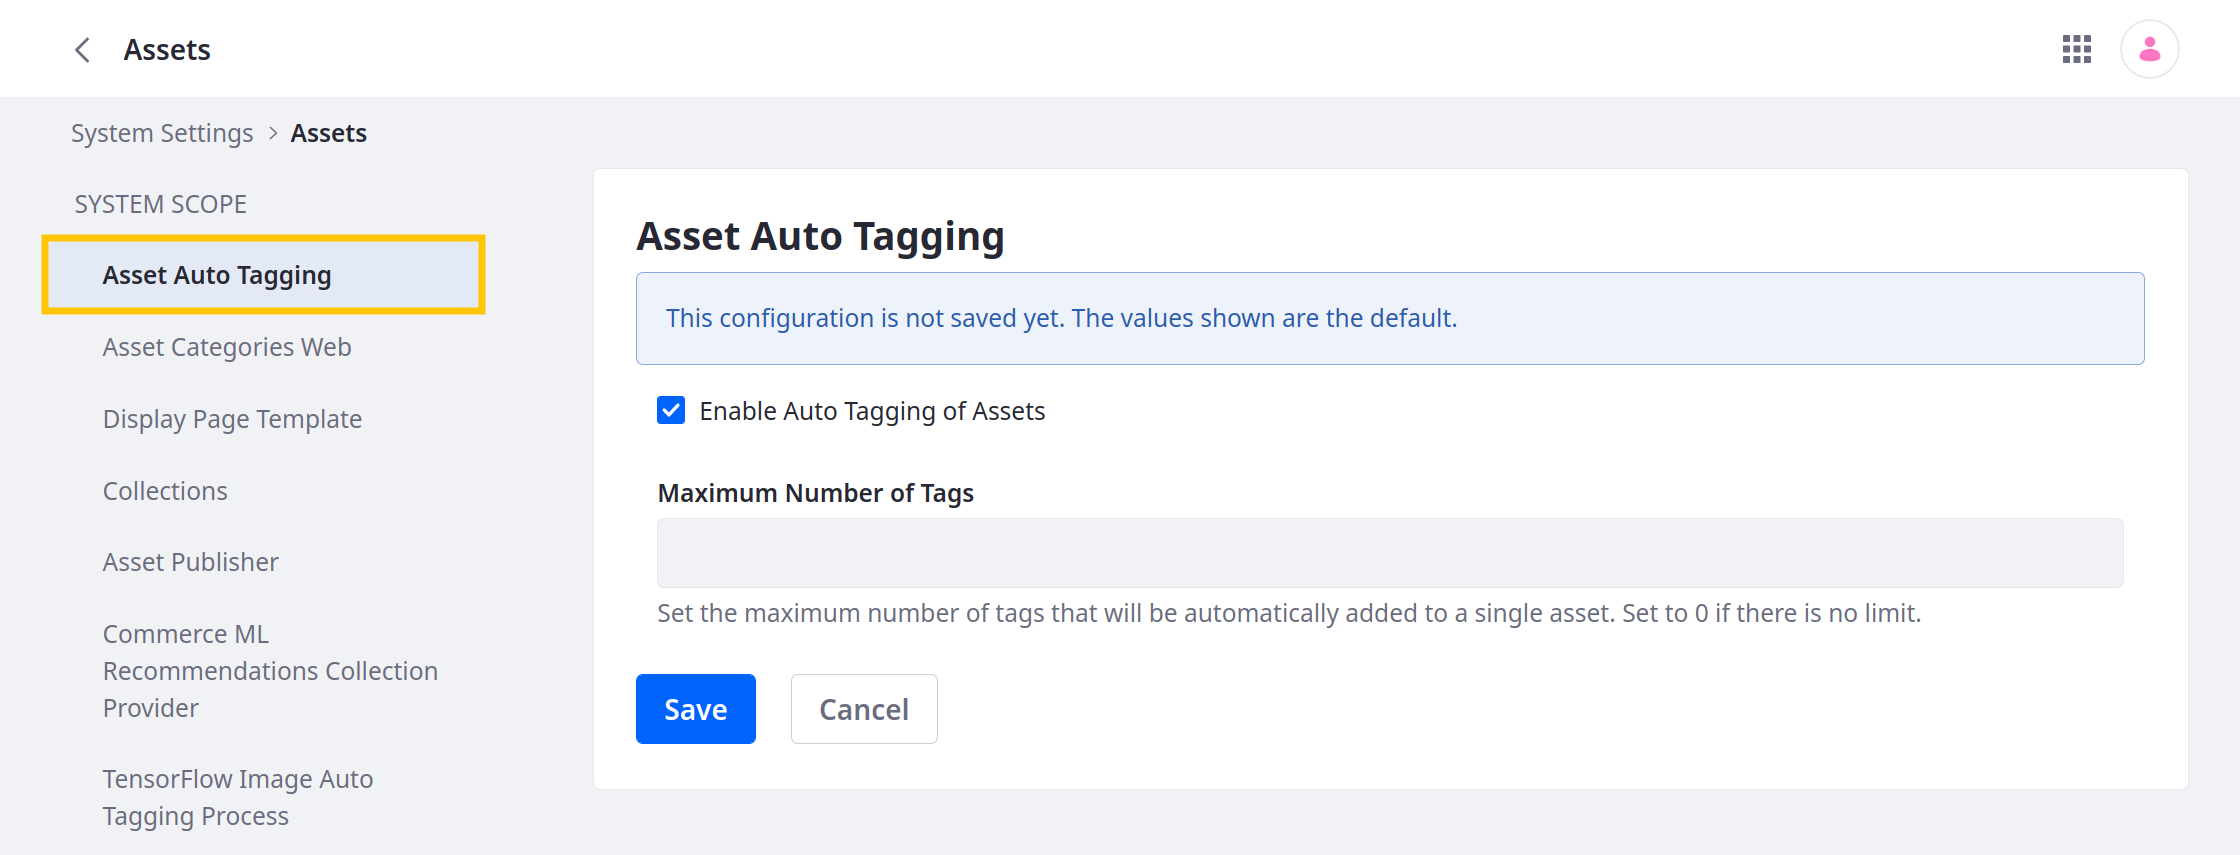 In Site Settings, click Assets and go to the Asset Auto Tagging tab under System Scope.